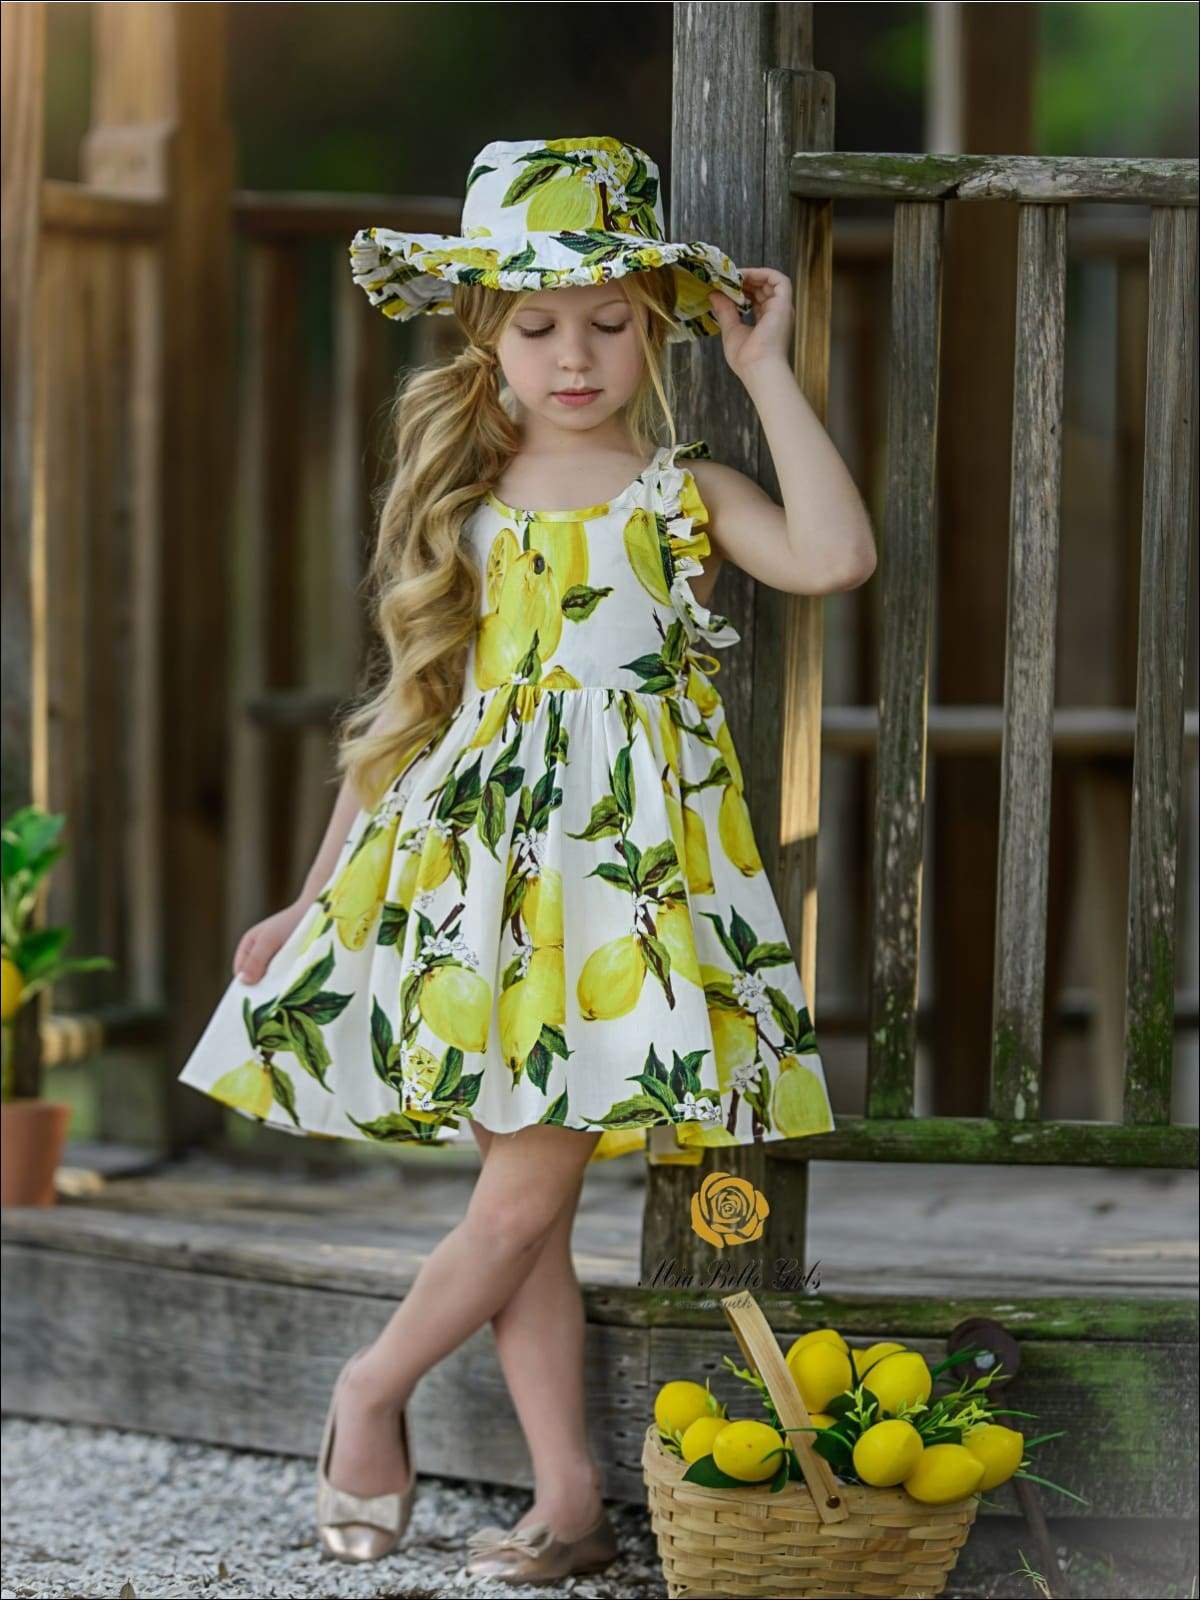 Girls Spring Sleeveless Floral Print Sun Dress with Matching Hat - Girls Spring Casual Dress